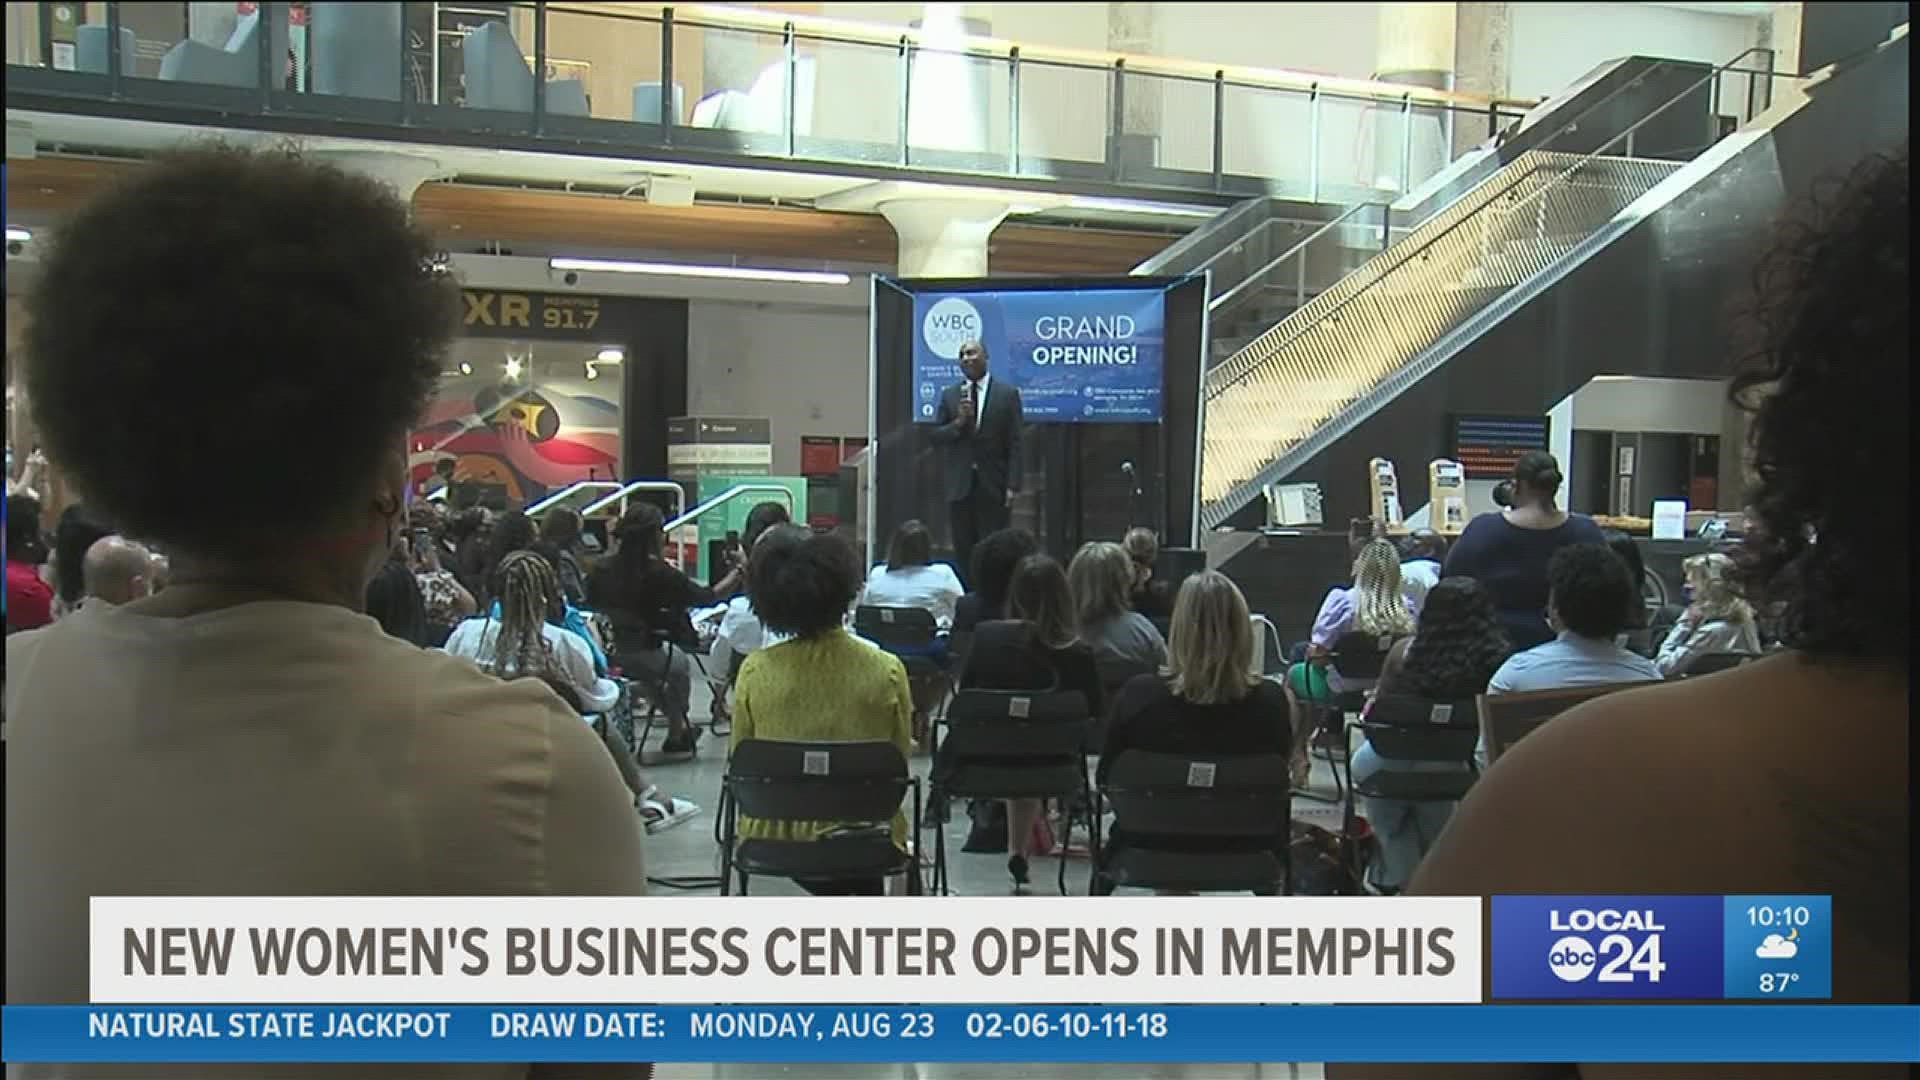 The center is one of 20 newly opened locations funded by the Small Business Administration to support women business owners.